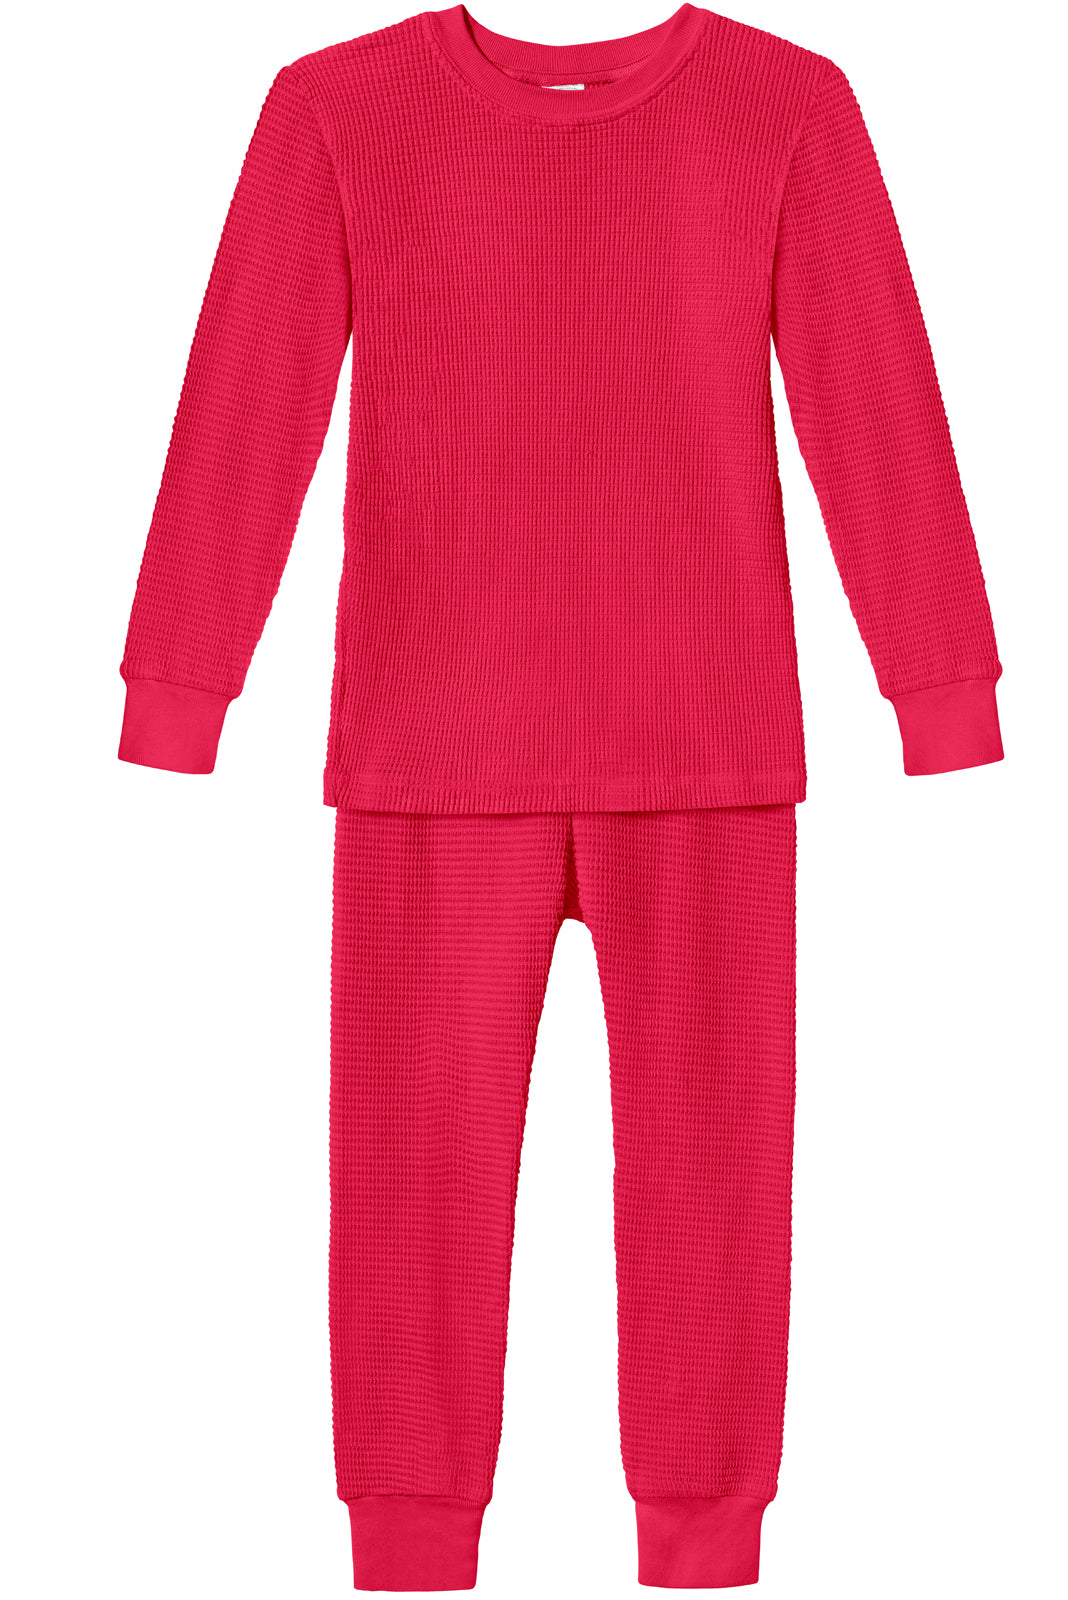 City Threads USA-Made Boys and Girls Soft & Cozy Thermal One-Piece Union  Suit | Medium Pink - 3/6M